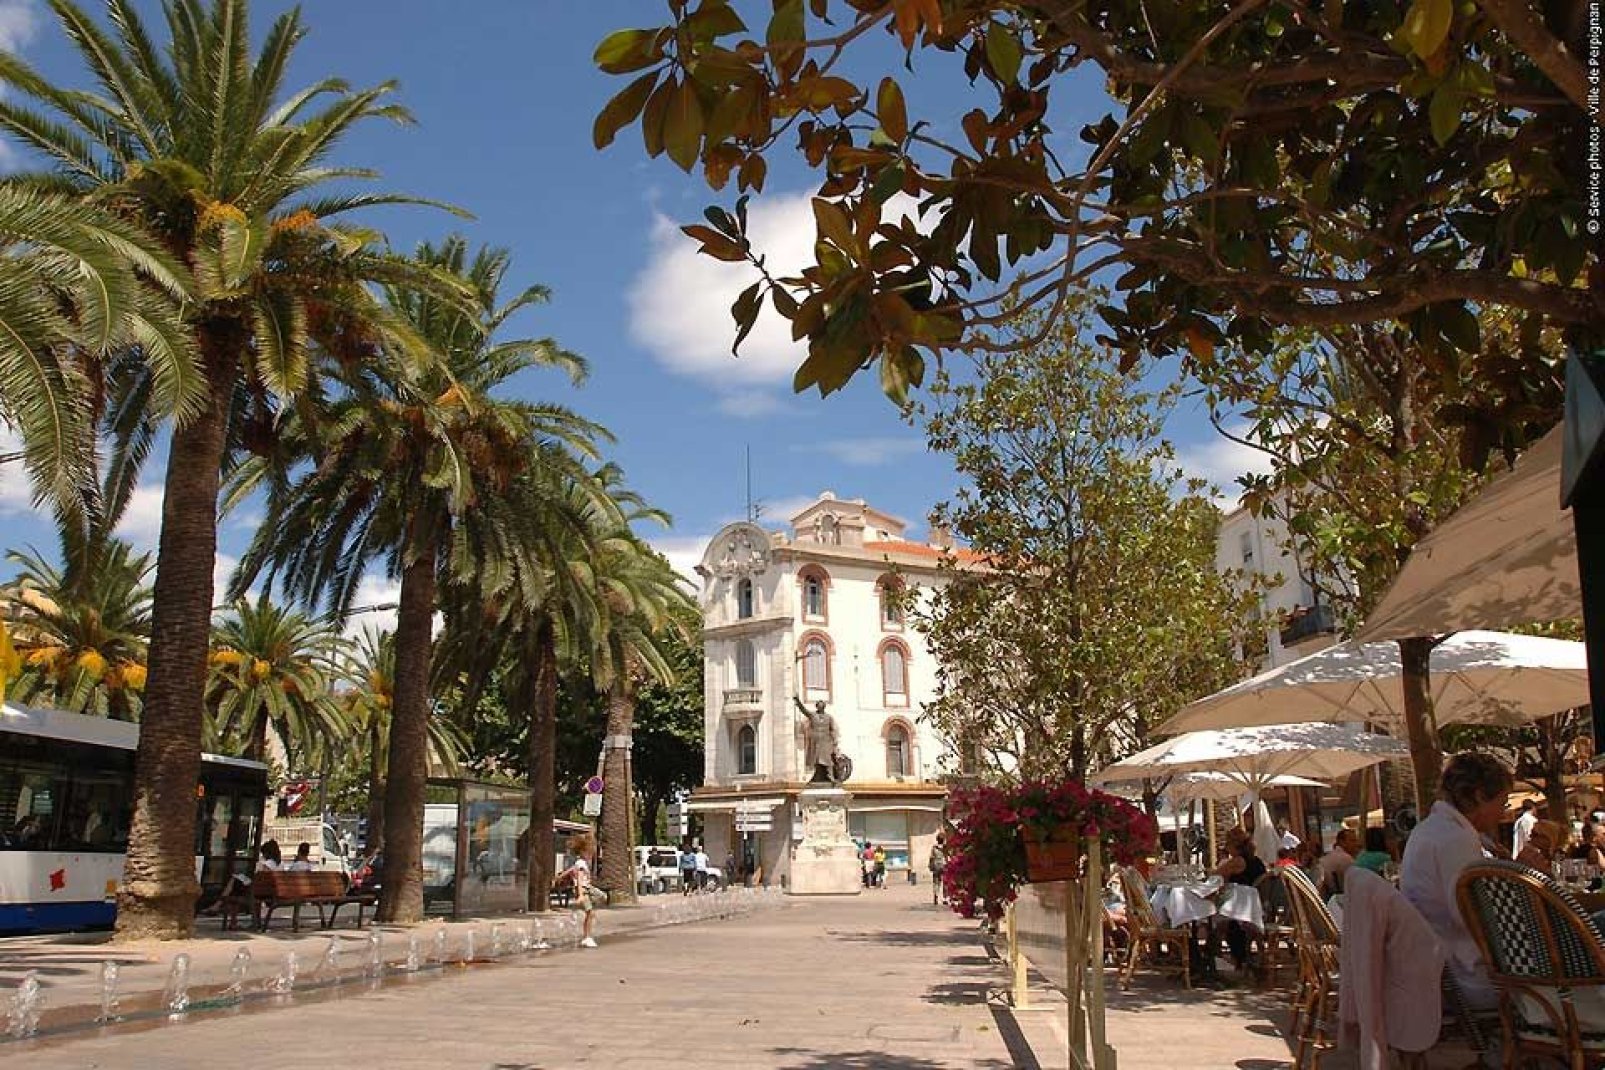 A particularly pleasant pastime in Perpignan involves relaxing on the terrace of one of the numerous cafes.